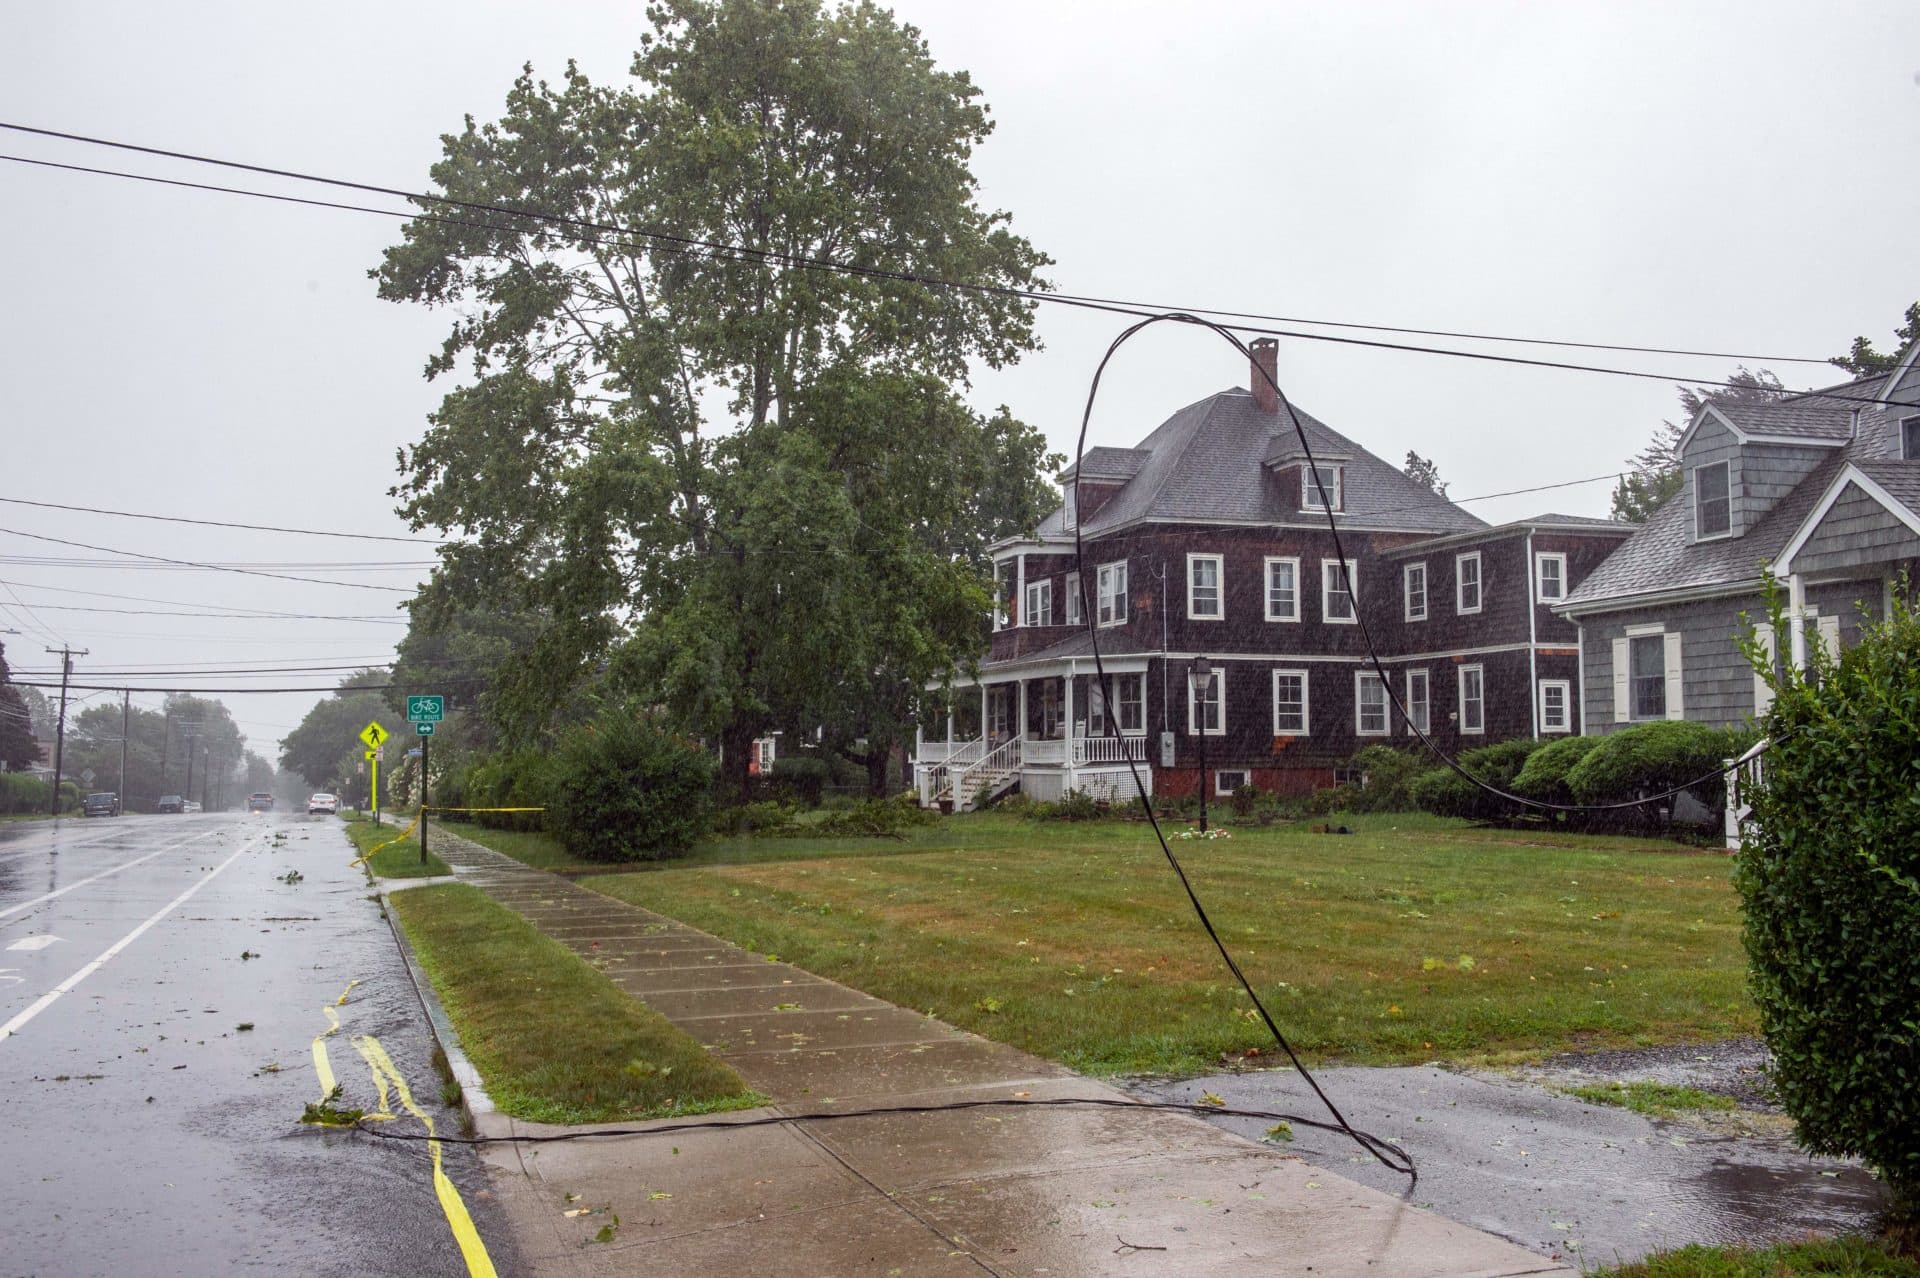 A power line hangs onto the road after being broken from a home when a tree fell onto it during Tropical Storm Henri in New London, Connecticut. (Joseph Prezioso/AFP via Getty Images)